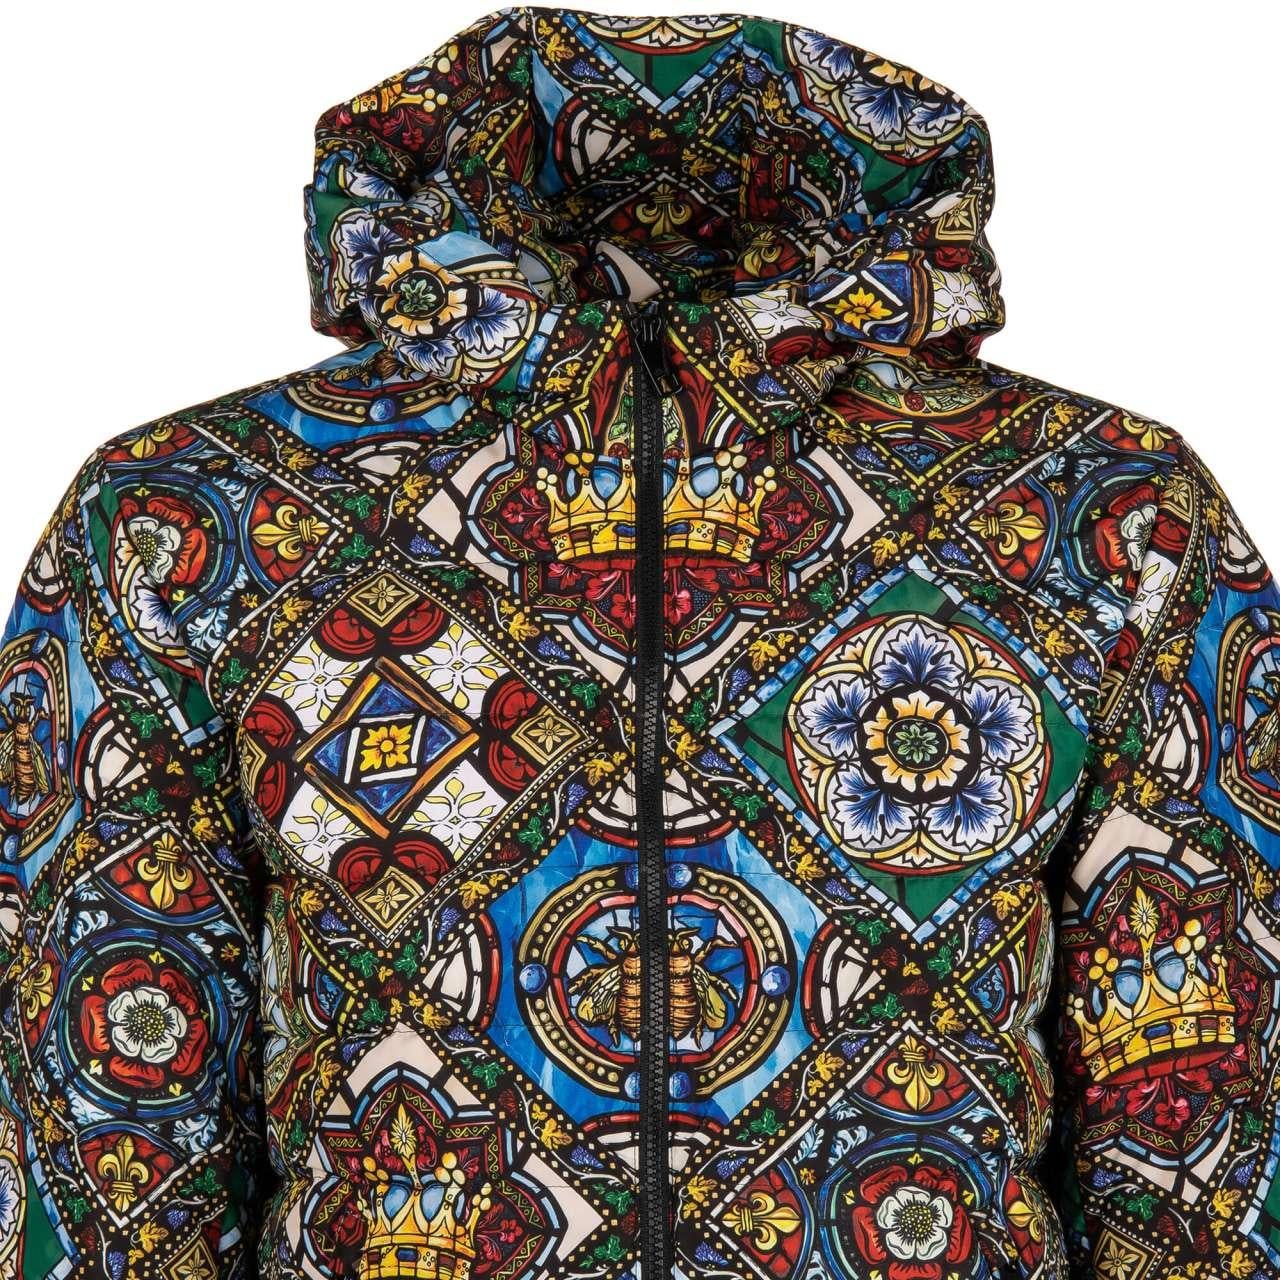 - Napoleon collection printed bomber down jacket with crowns and bees print and hoody by DOLCE & GABBANA - New with tag - Slim Fit - MADE IN ITALY - Model: G9QW7T-HSMIC-HH94C - Material: 100% Polyester - Lining: 100% Polyester - Stuffing: 70% Down